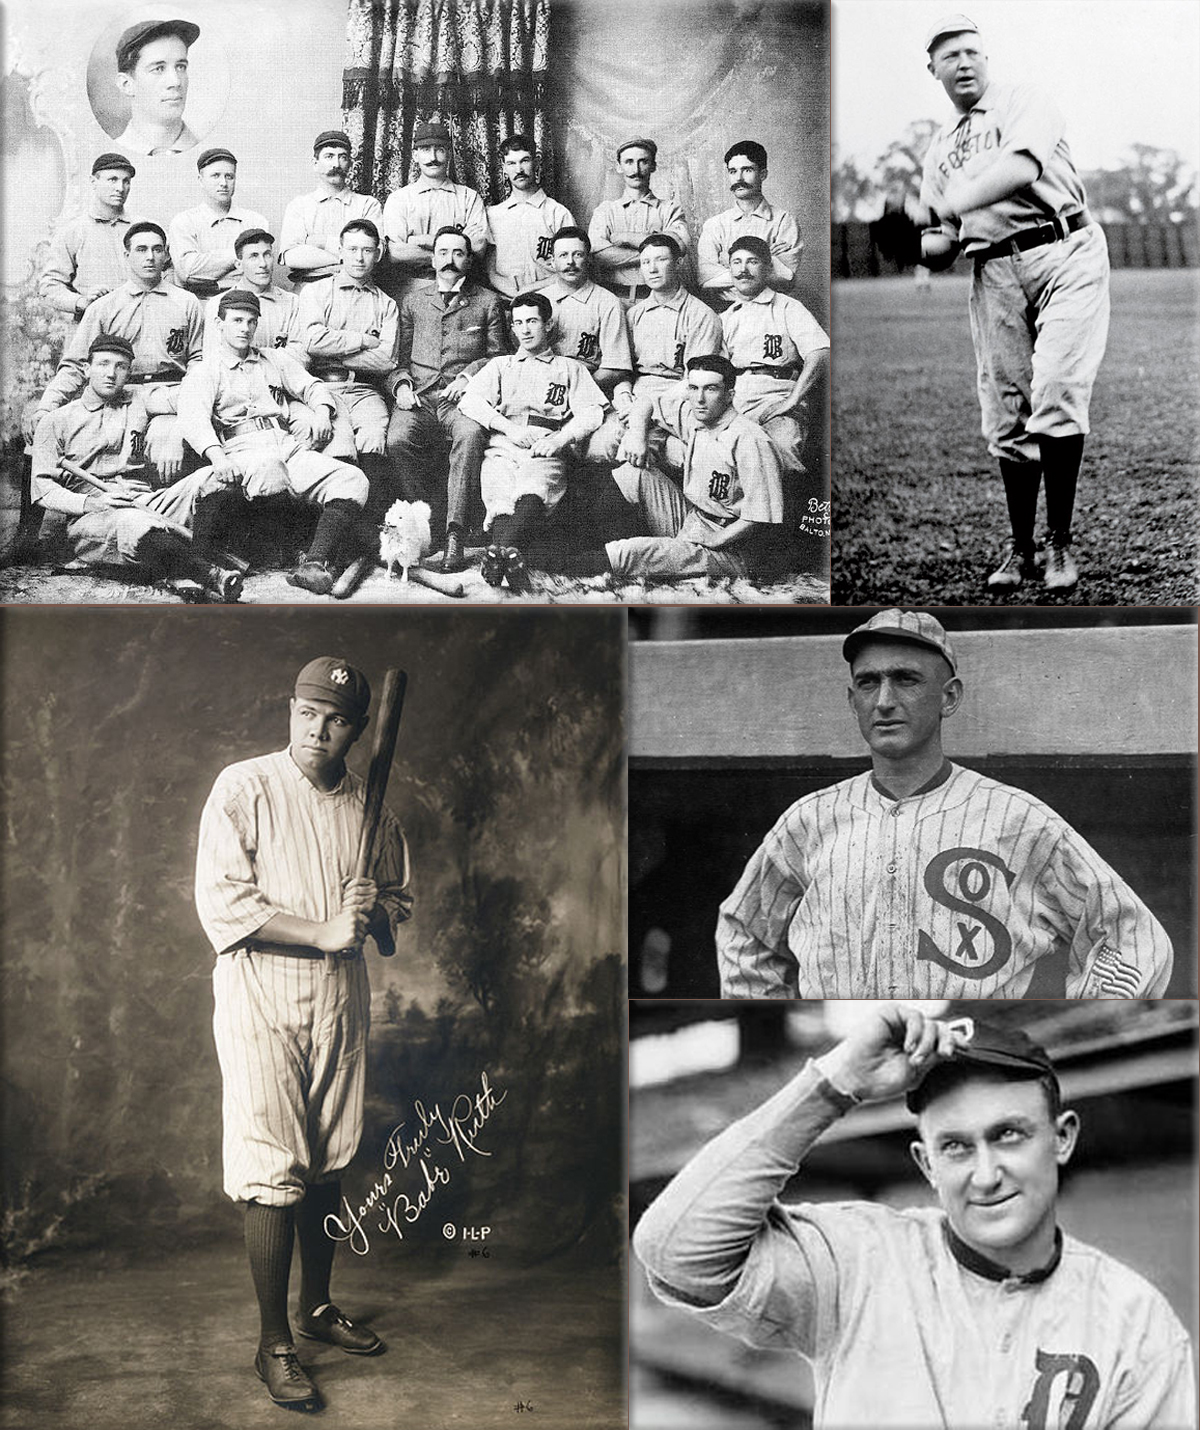 National League Baseball, Baltimore Orioles ● Cy Young won 21 or more games 15 times in his career and had 13 victories at age 39 in 1906. ● Babe Ruth in 1920 ● hoeless Joe Jackson, Chicago White Sox 1919 ● Ty Cobb, Detroit Tigers outfield